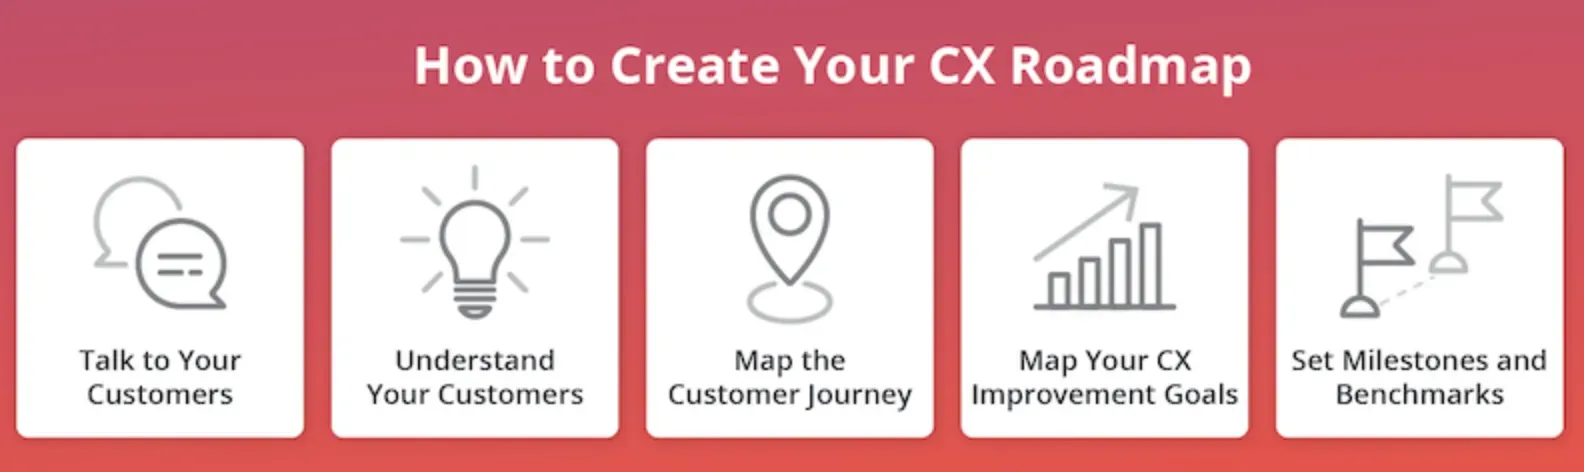 5 Steps for Creating a CX Tech Ecosystem